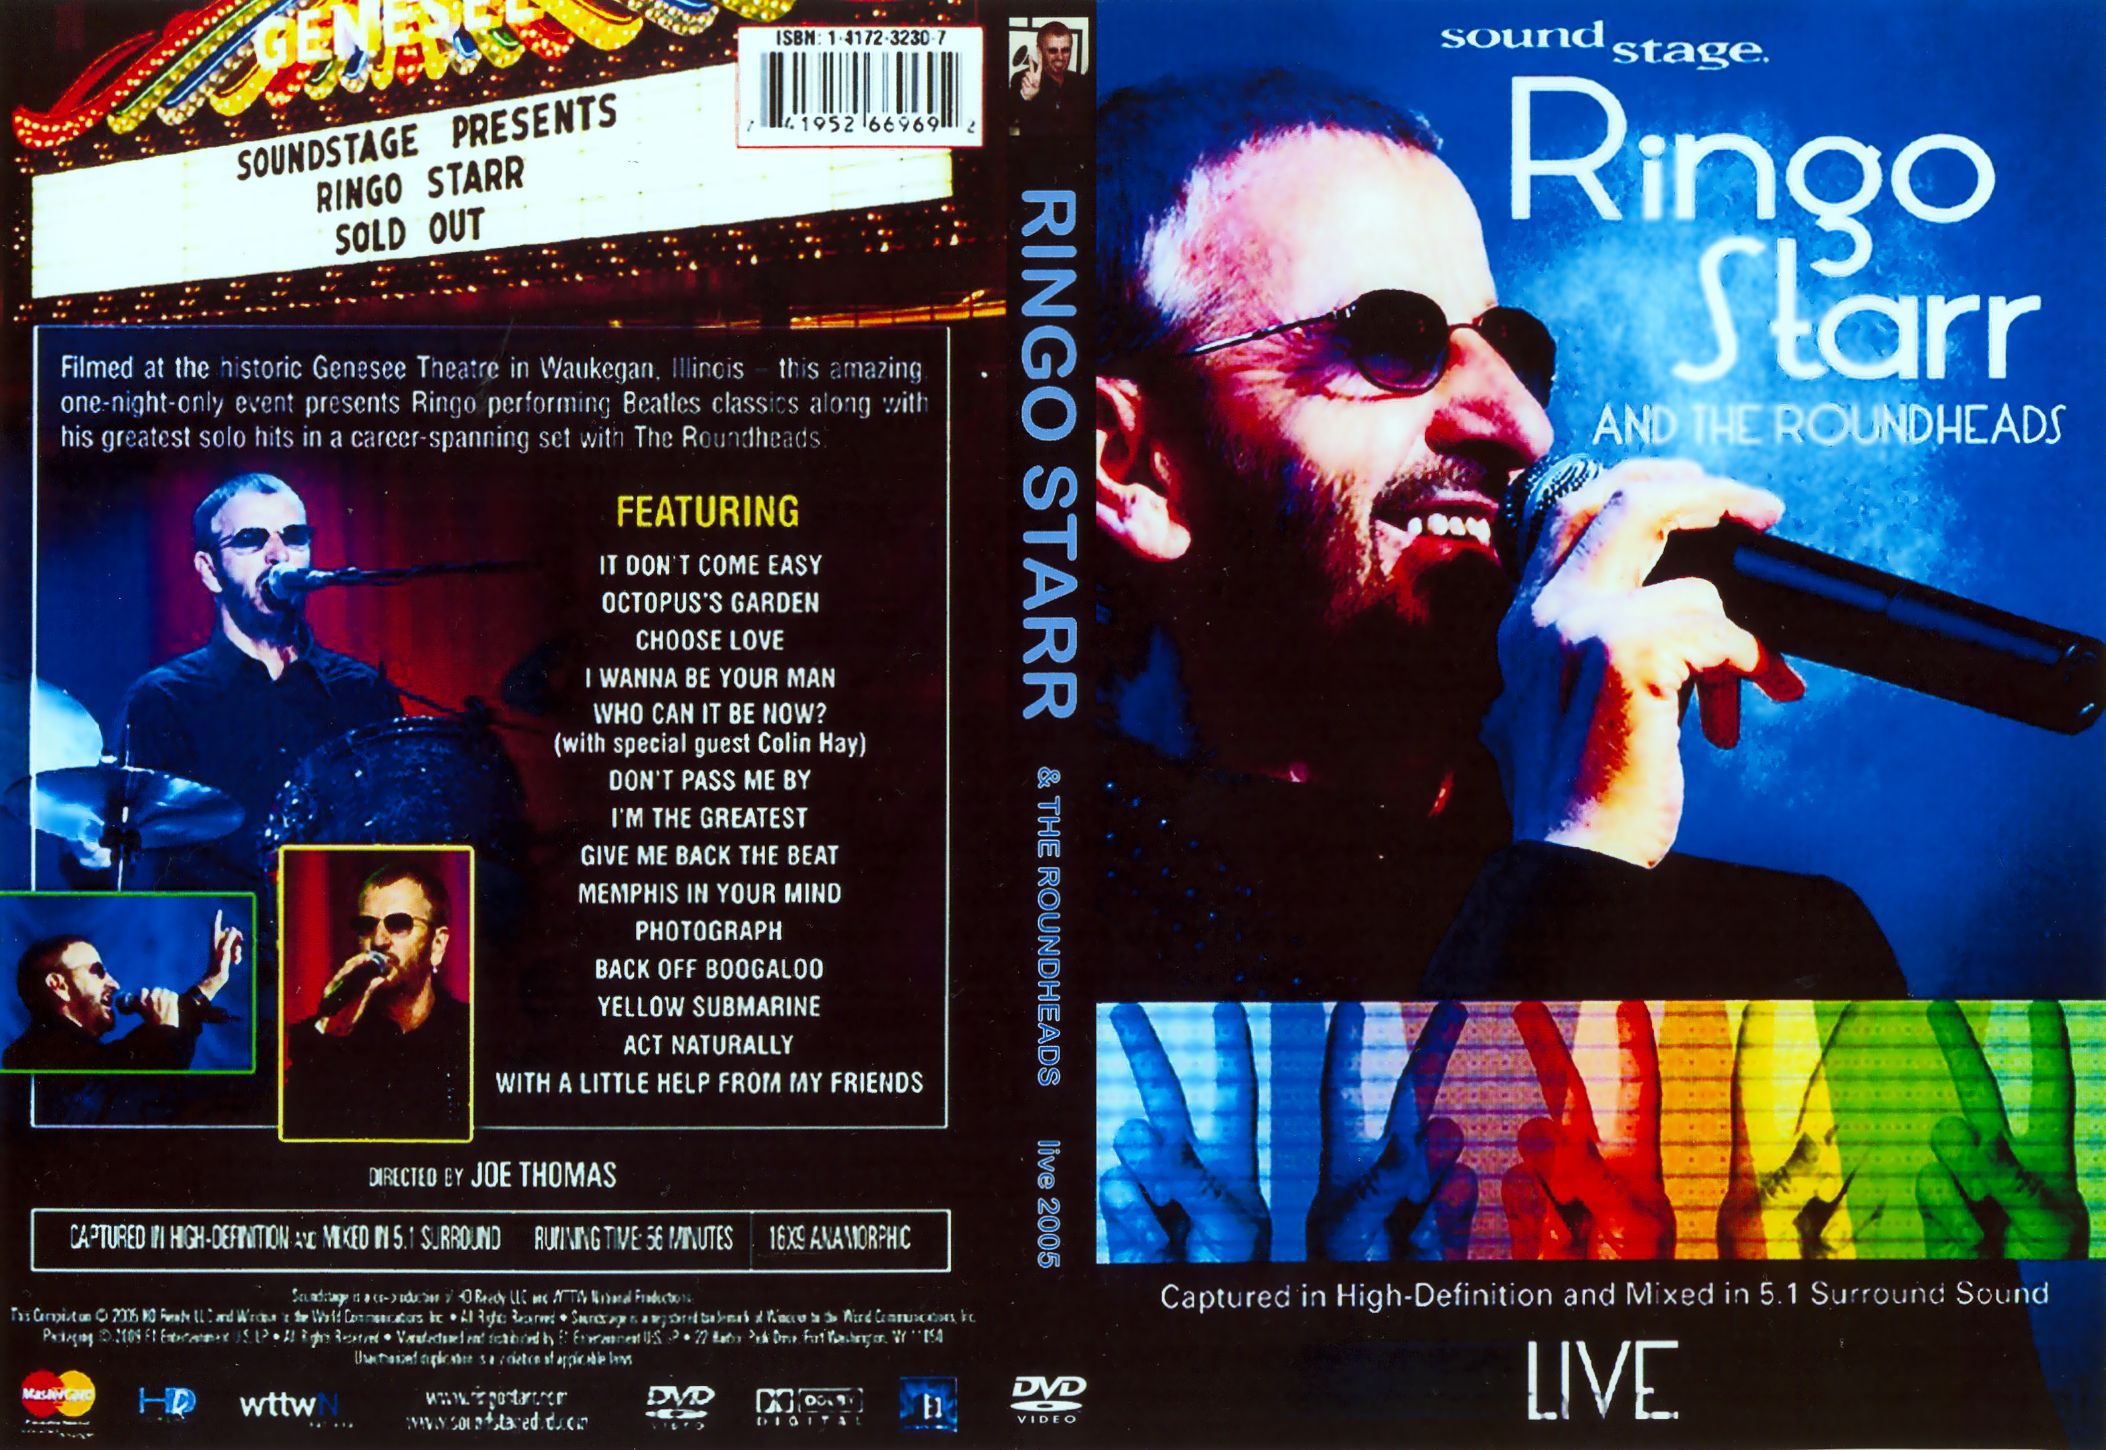 Ringo Starr and the Roundheads Live Soundstage [2009, Rock, DVD5